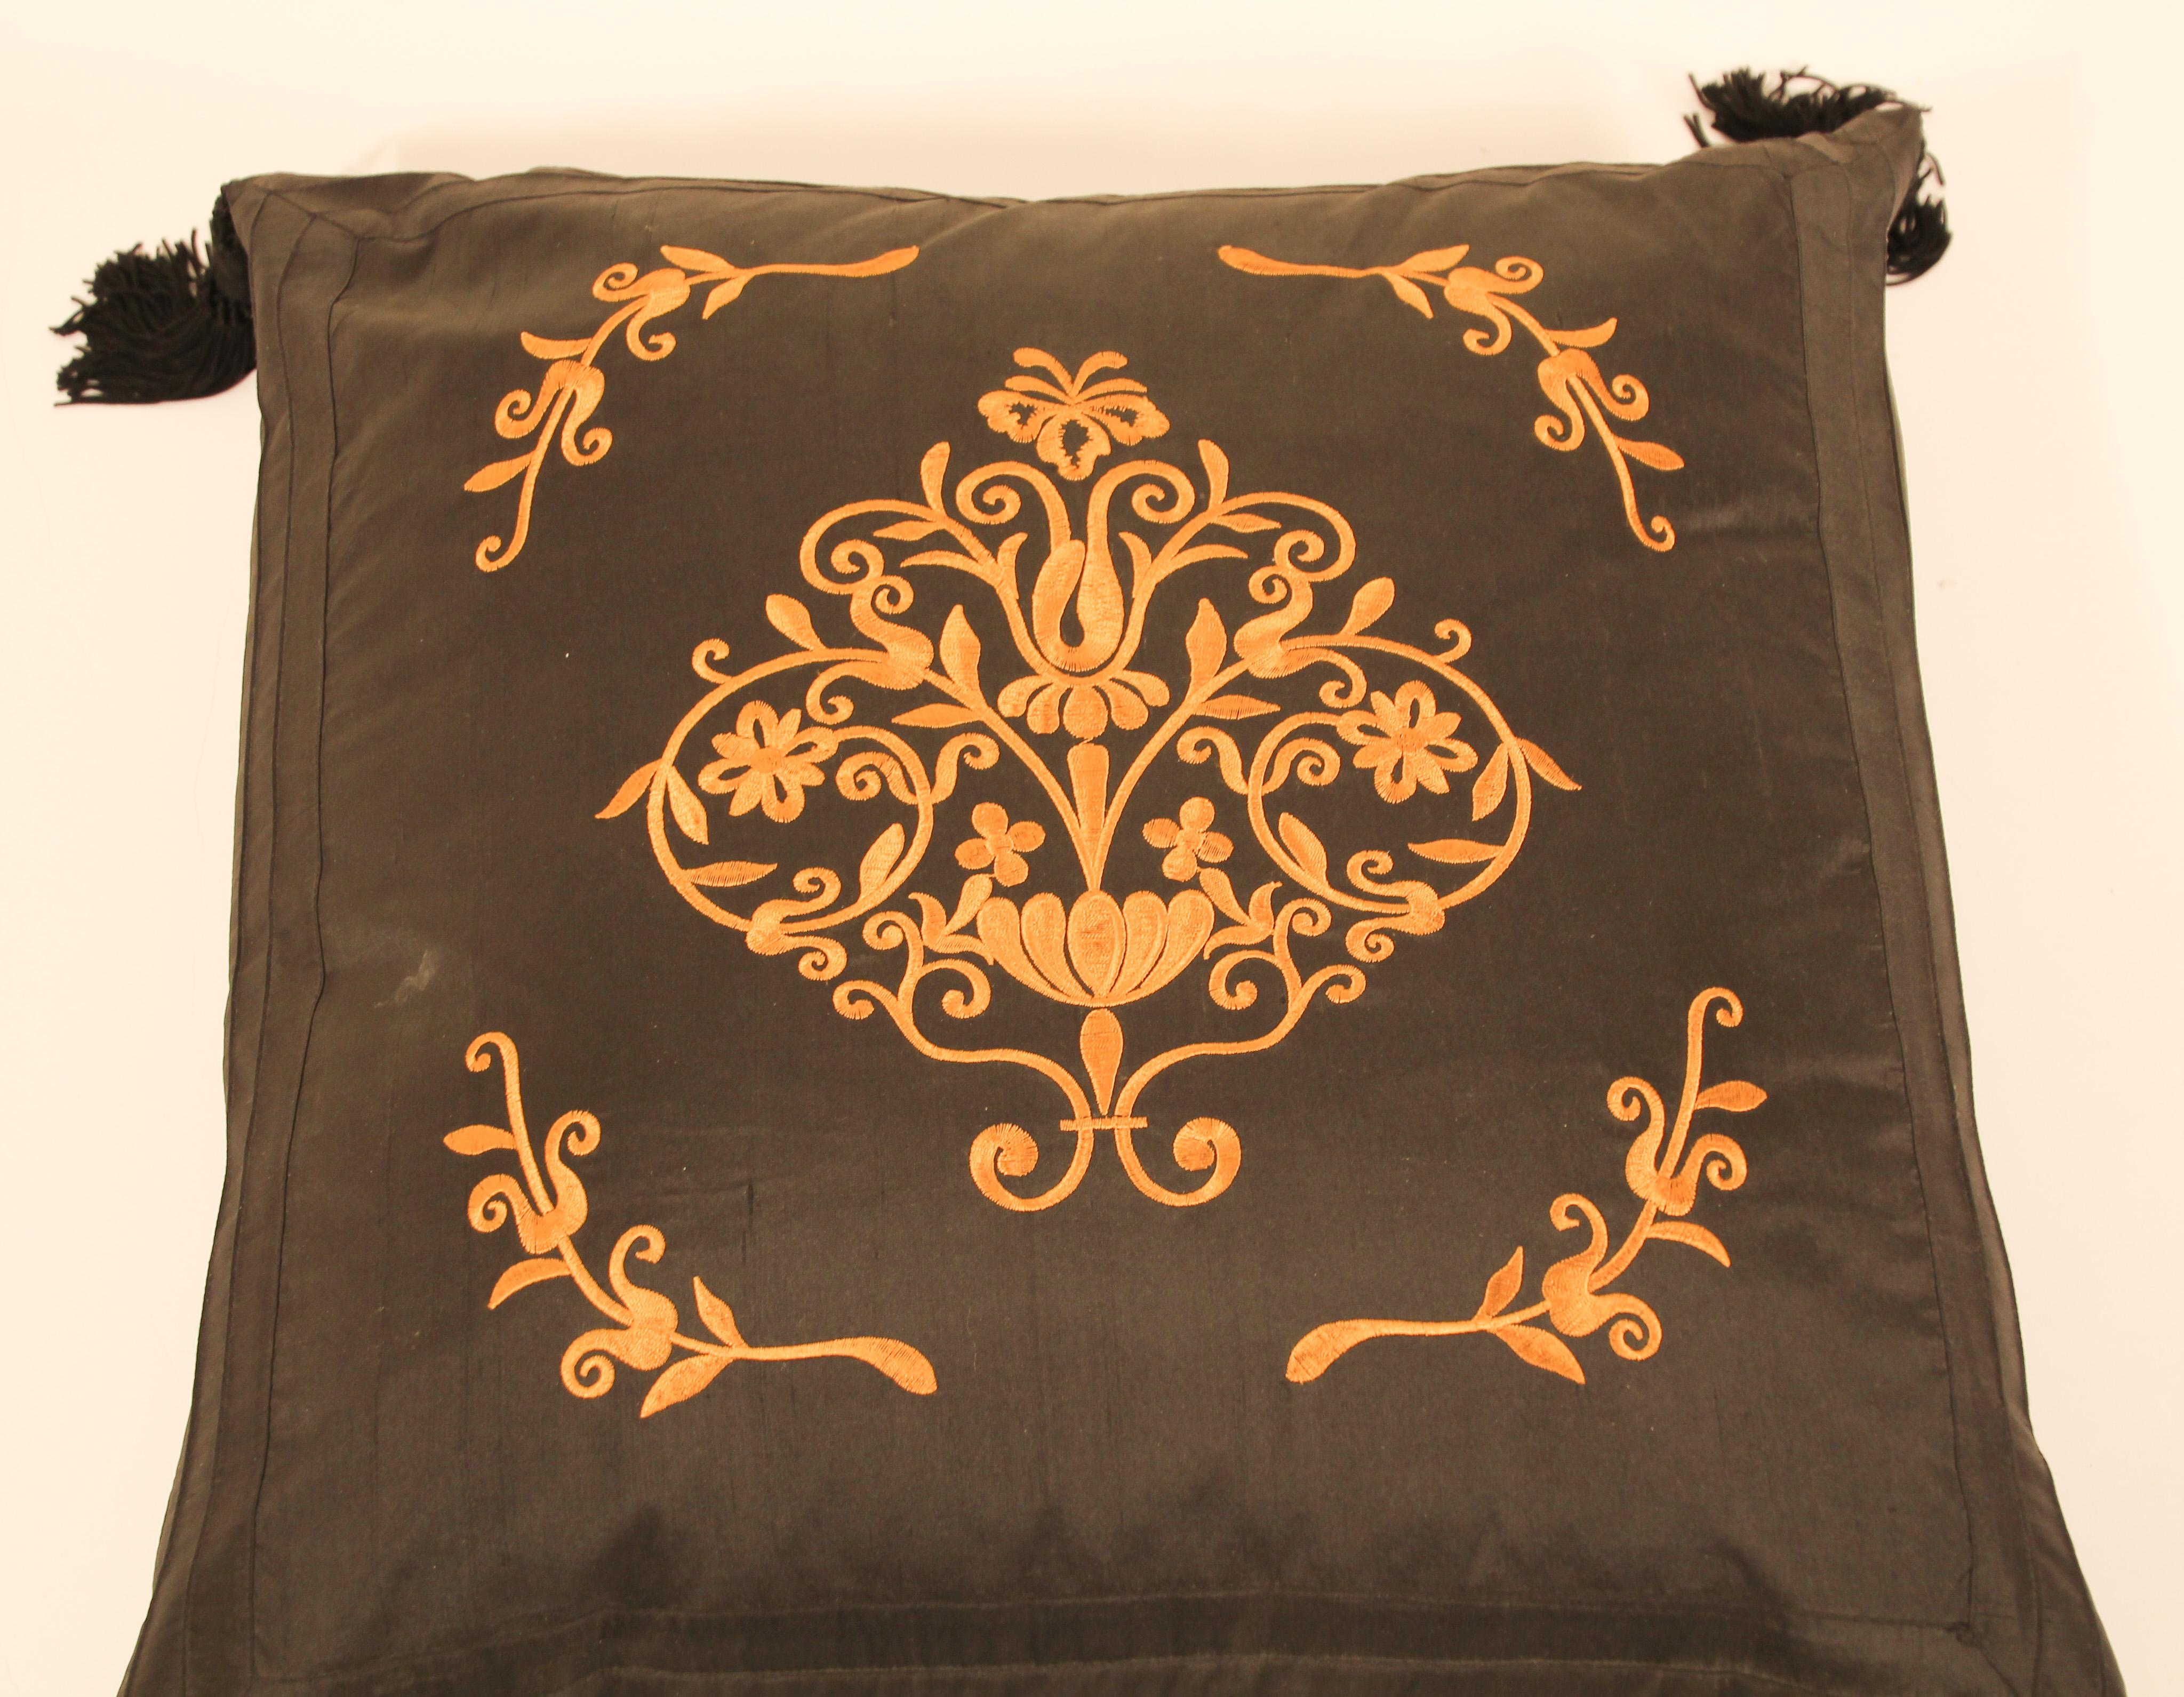 Black silk decorative accent pillow with tassels.
Gold embroidered silk with four large tassels.
Baroque gold floral decor embroidered in front of the pillow.
  